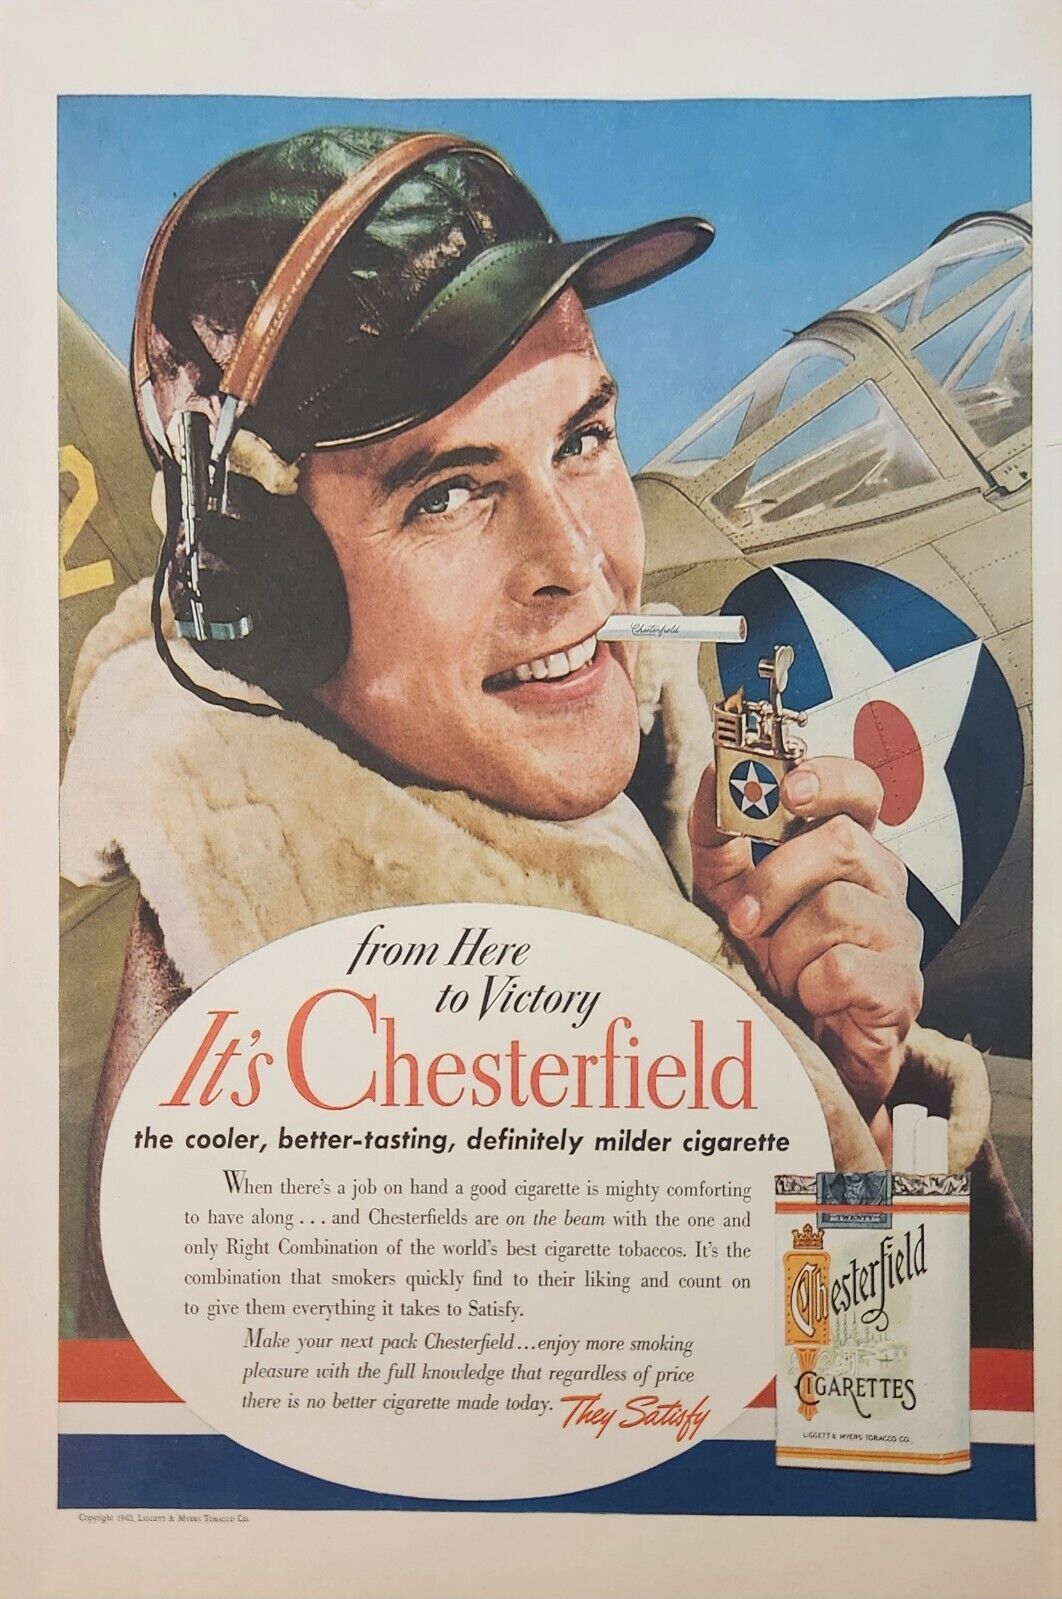 1942 Chesterfield Cigarettes Vintage For from here to victory